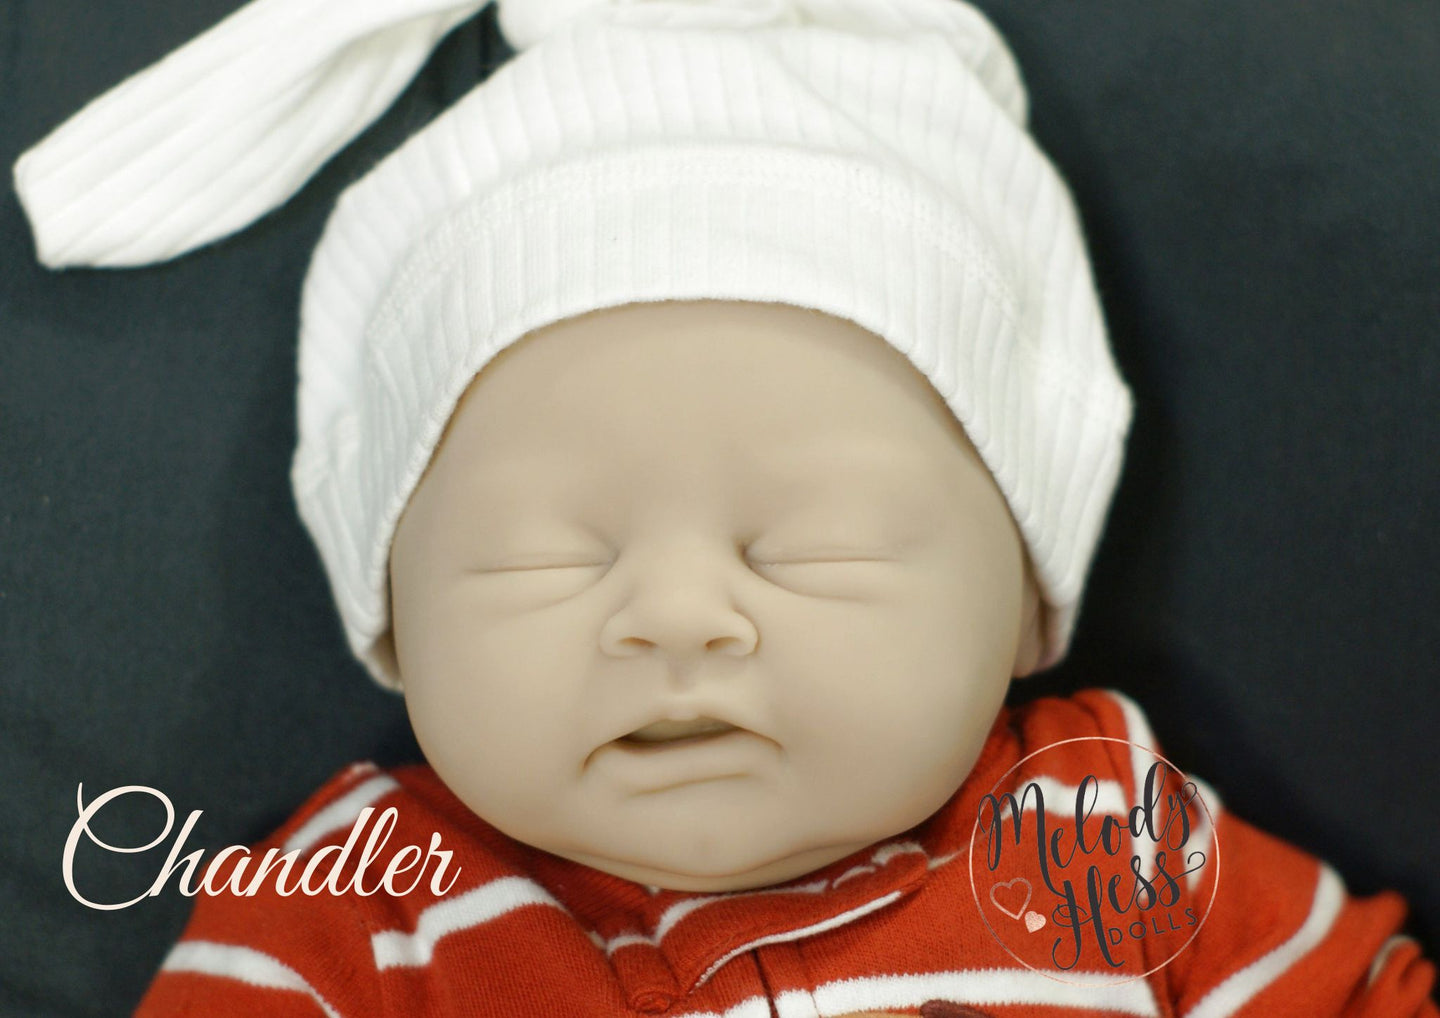 Chandler Blank Silicone Cuddle Head (Poured on Demand)